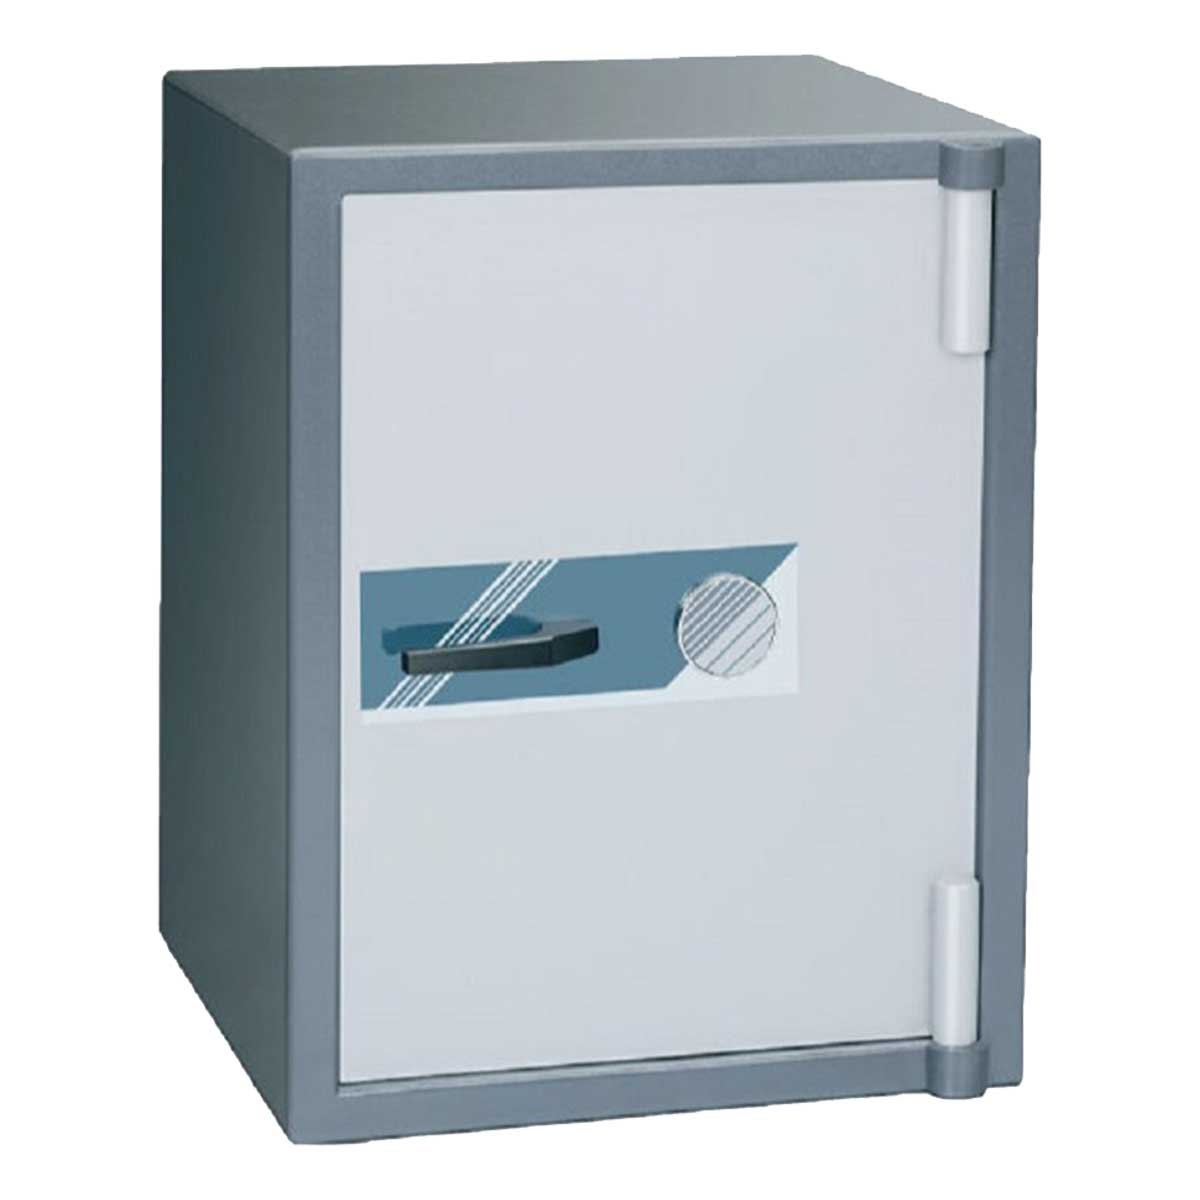 Burglary Safes Manufacturers, Suppliers in Greater Kailash